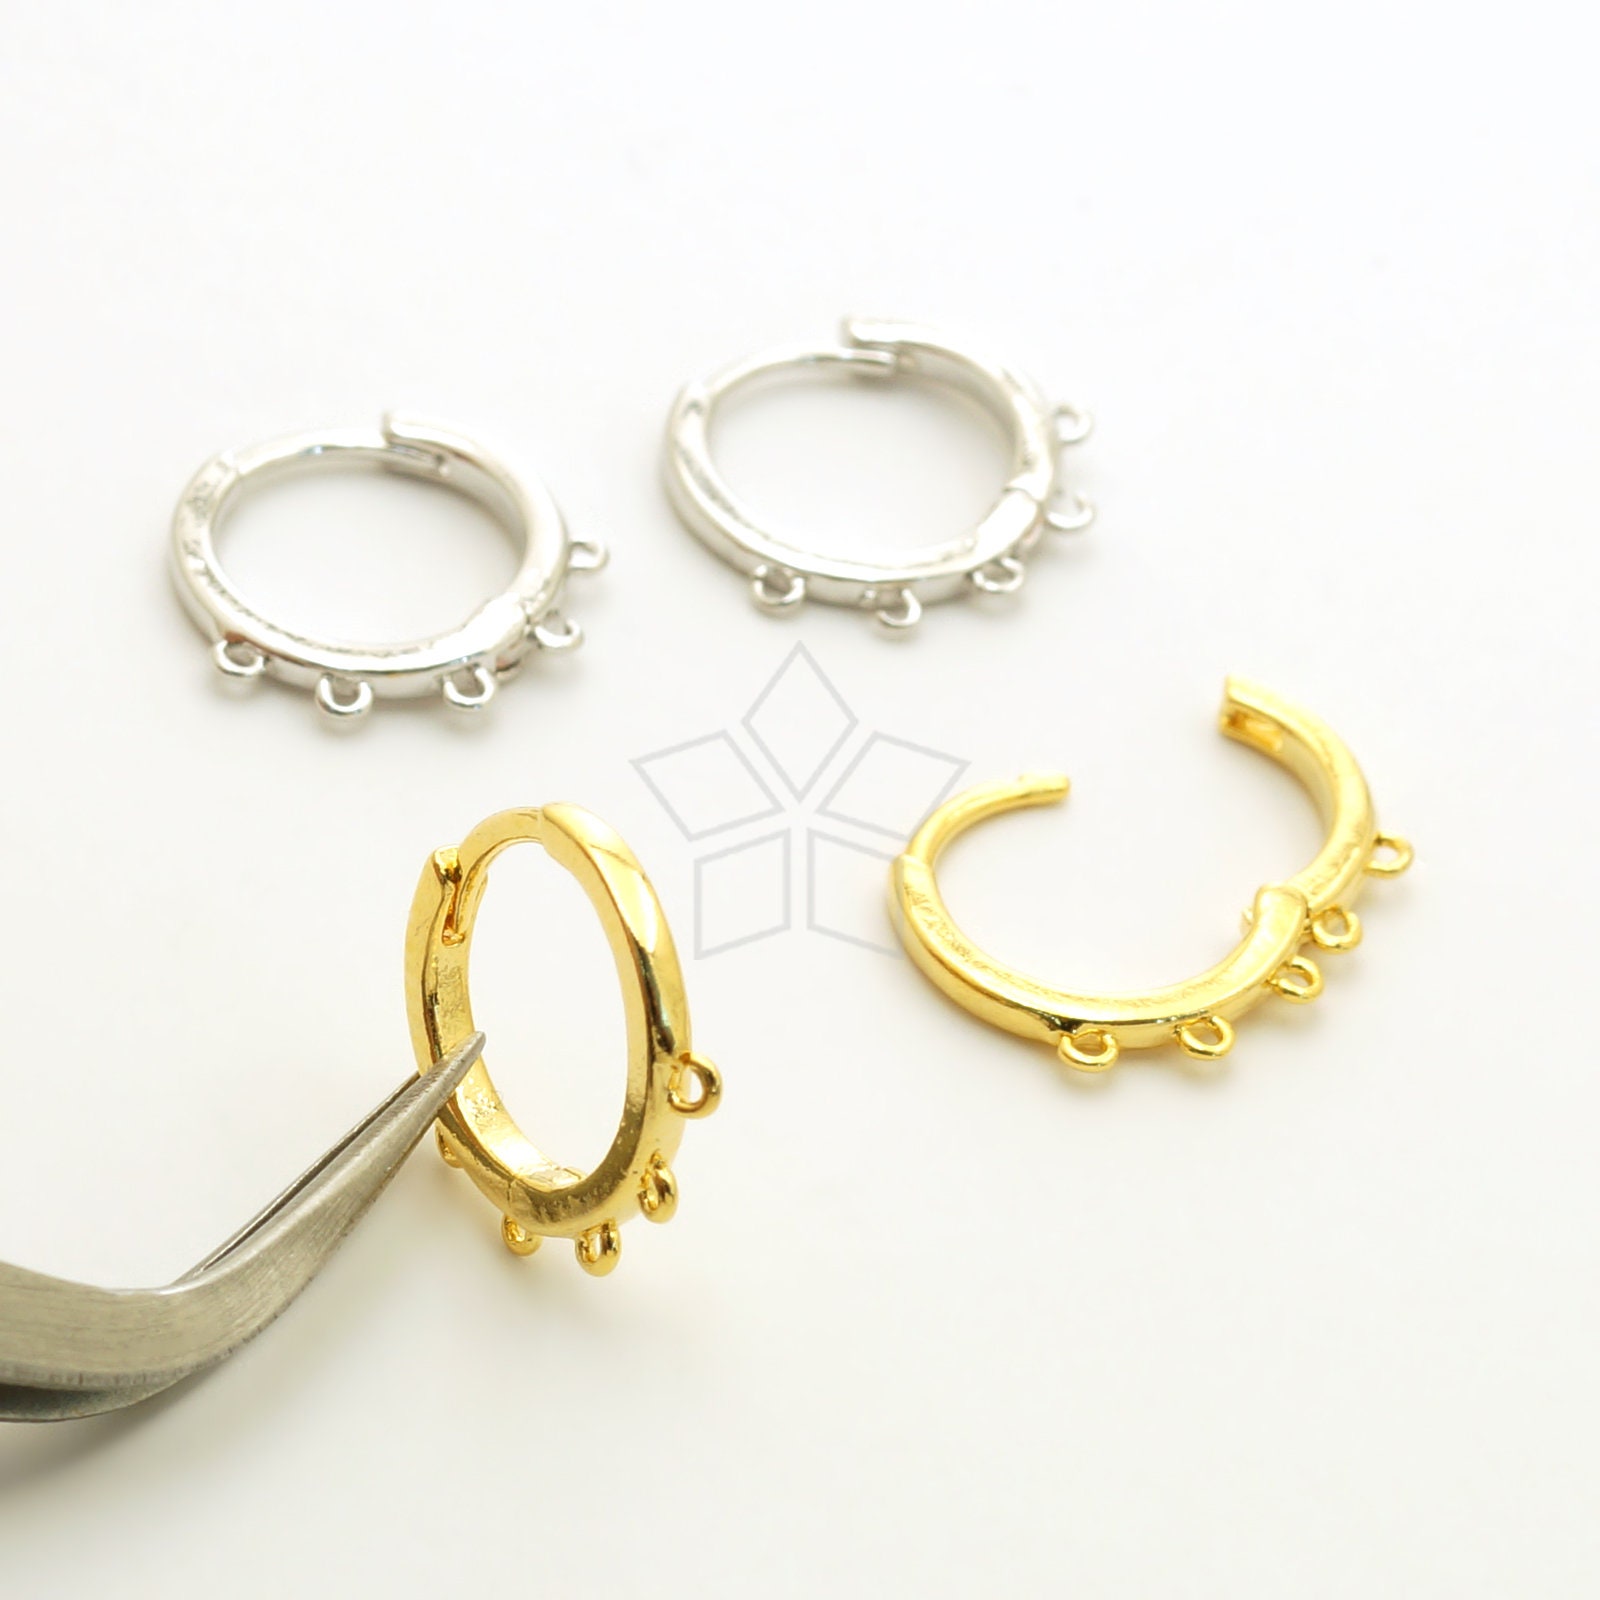 CS-019-OP / 6 Pcs for 1 Strand Fold Over Box Clasp Brass for Bracelet, 6  Sets 6 Buckles and 12 Square Rings, Choose Color / 6x18mm -  Finland